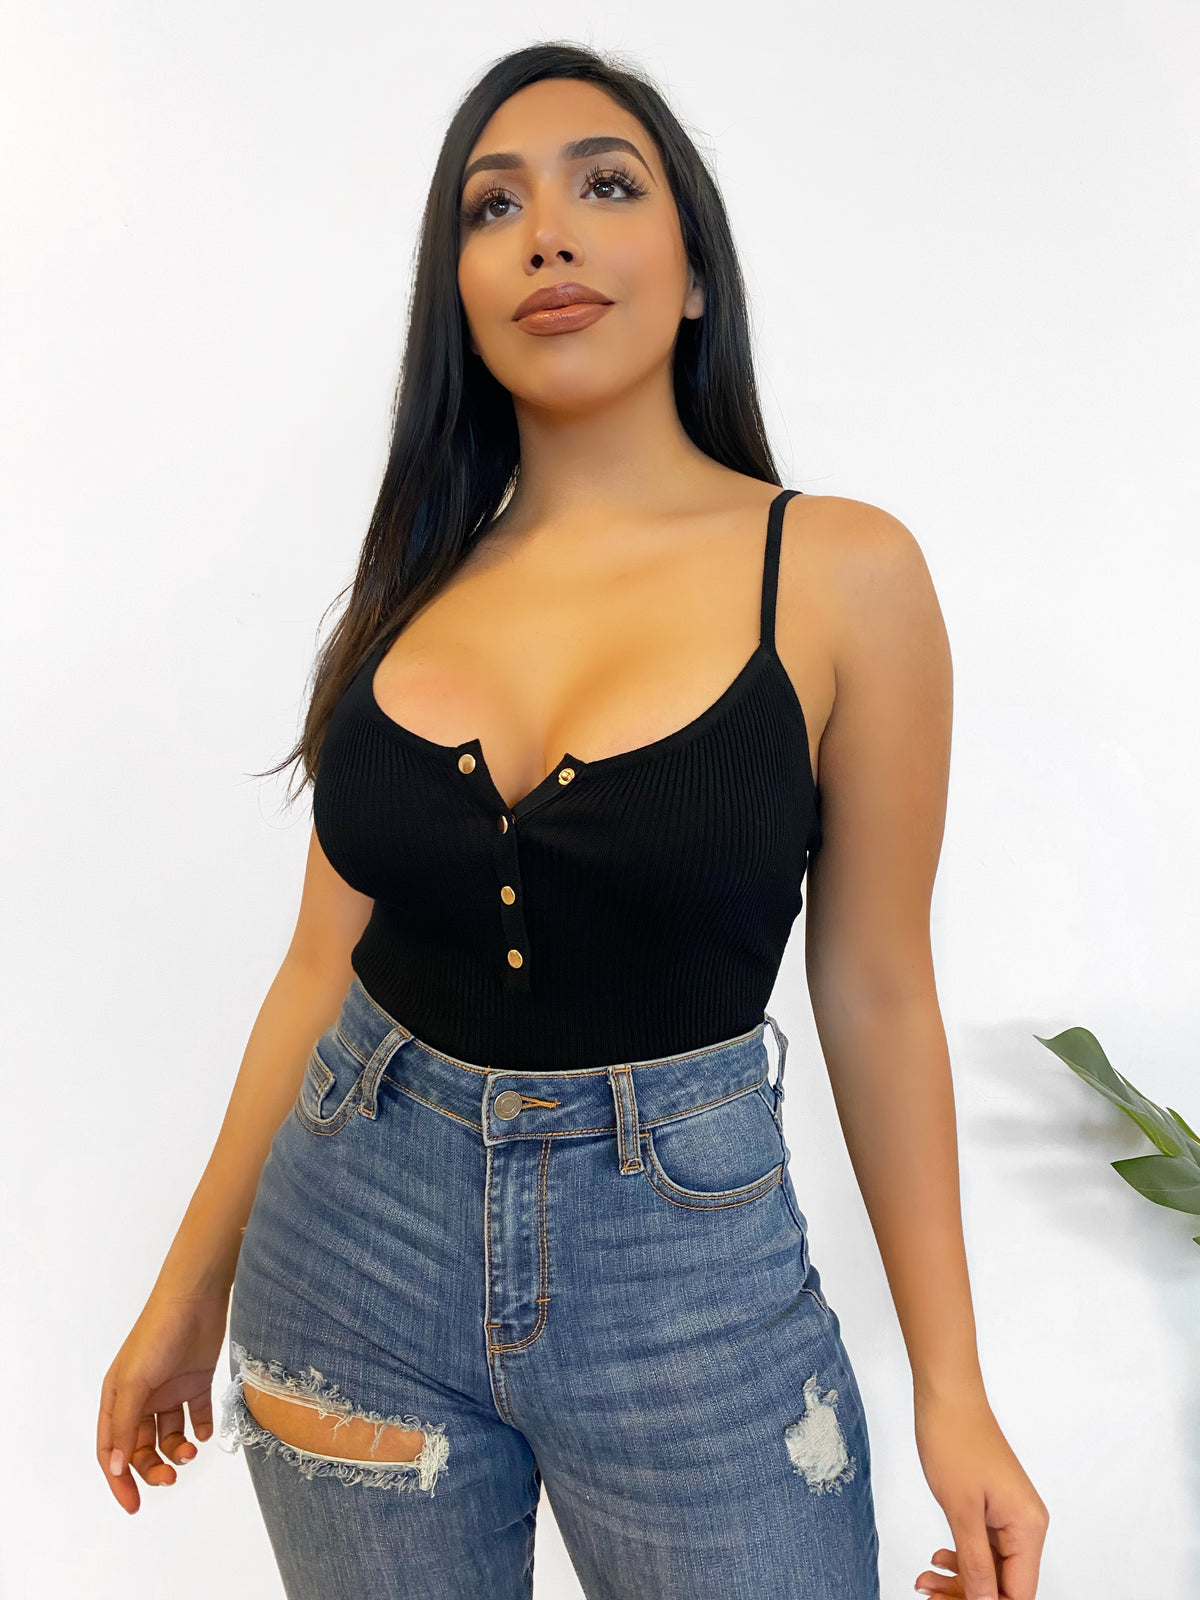 SPAGHETTI STRAP BODYSUIT, RIBBED MATERIAL, STRETCHY, MID CLEAVAGE SHOWING, MID BACK SHOWING, GOLD BUTTONS DOWN THE MIDDLE FRONT, COLOR IS BLACK.